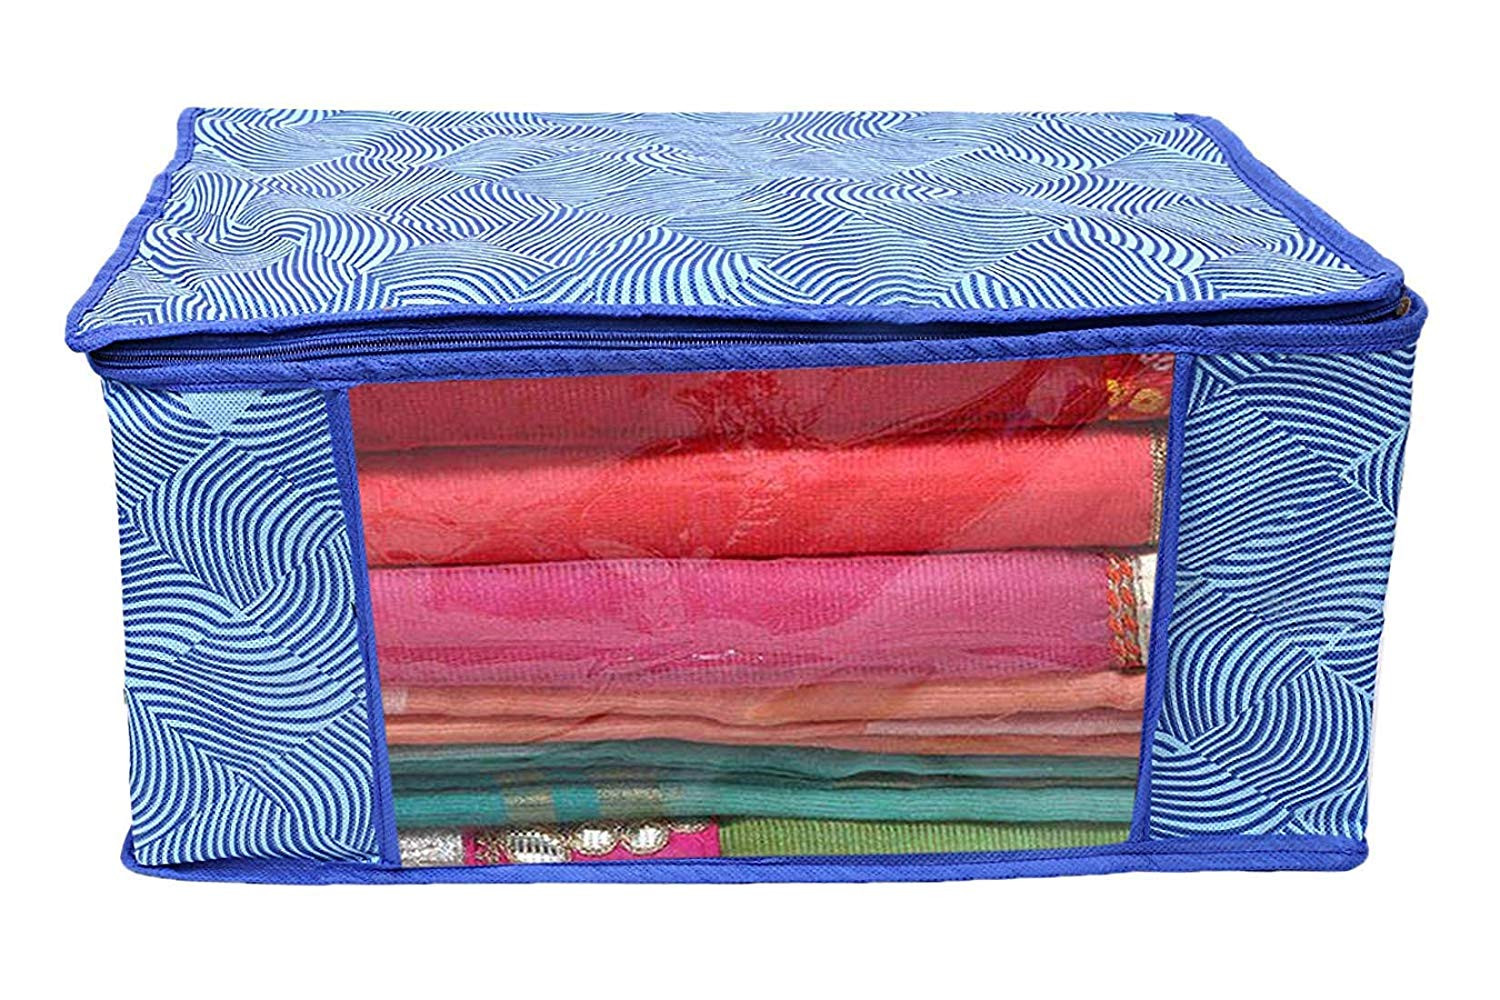 Kuber Industries Laheriya Printed Non Woven Saree Cover And Underbed Storage Bag, Cloth Organizer For Storage, Blanket Cover Combo Set (Blue) -CTKTC38679